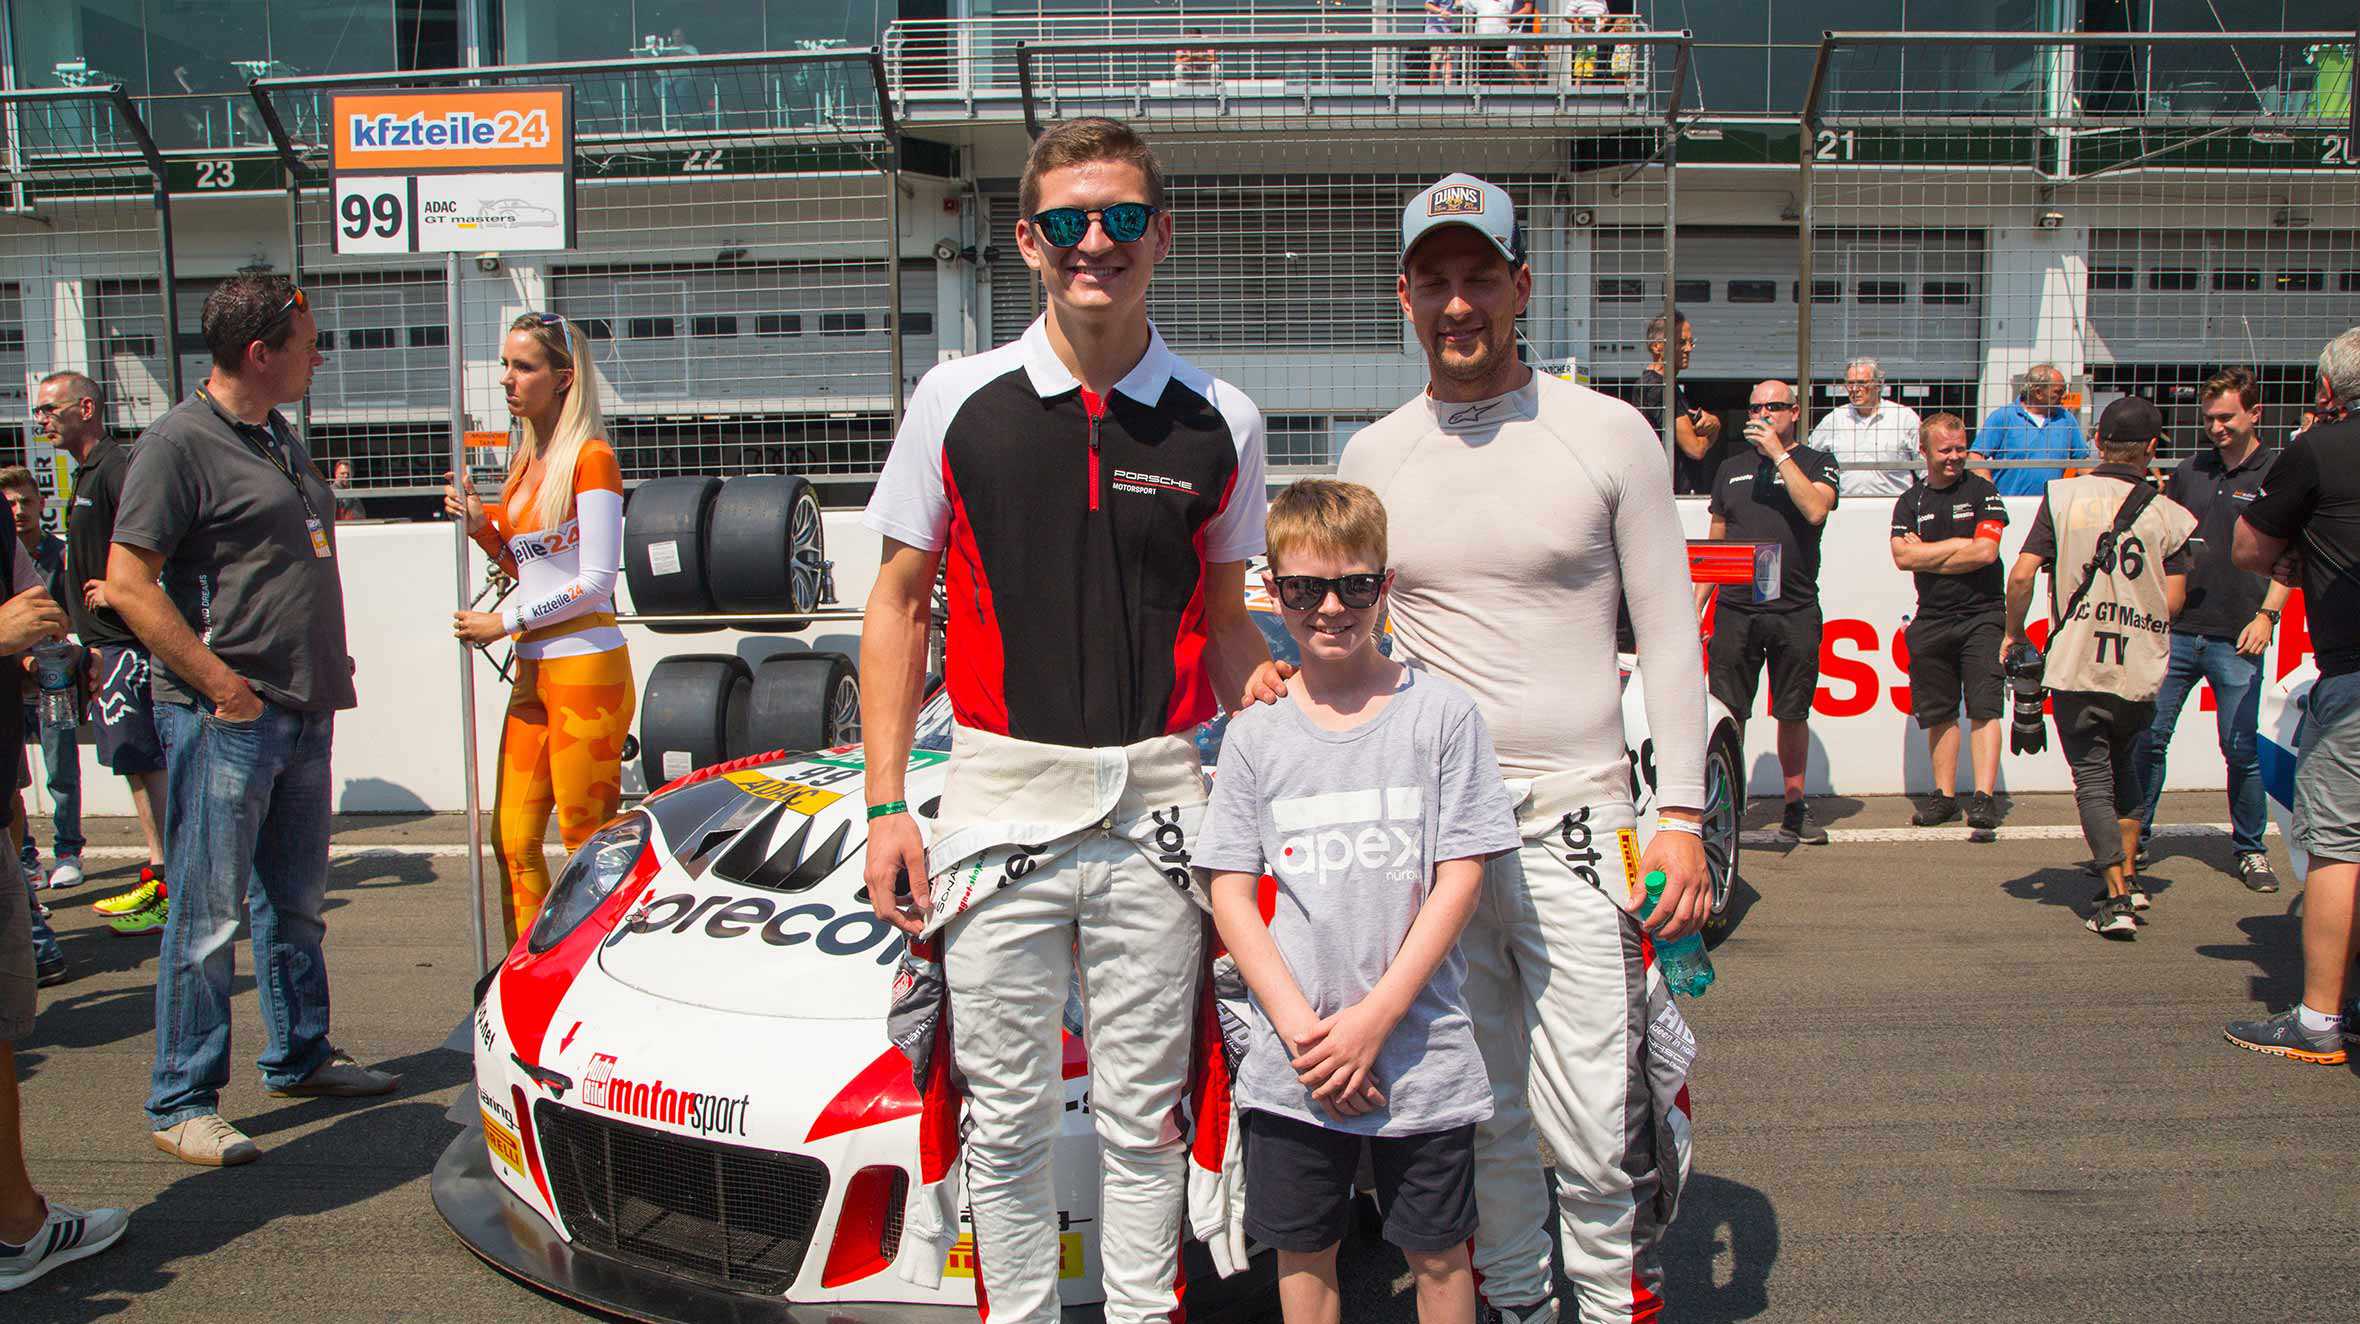 Dewi posing in front of a racing car with two drivers